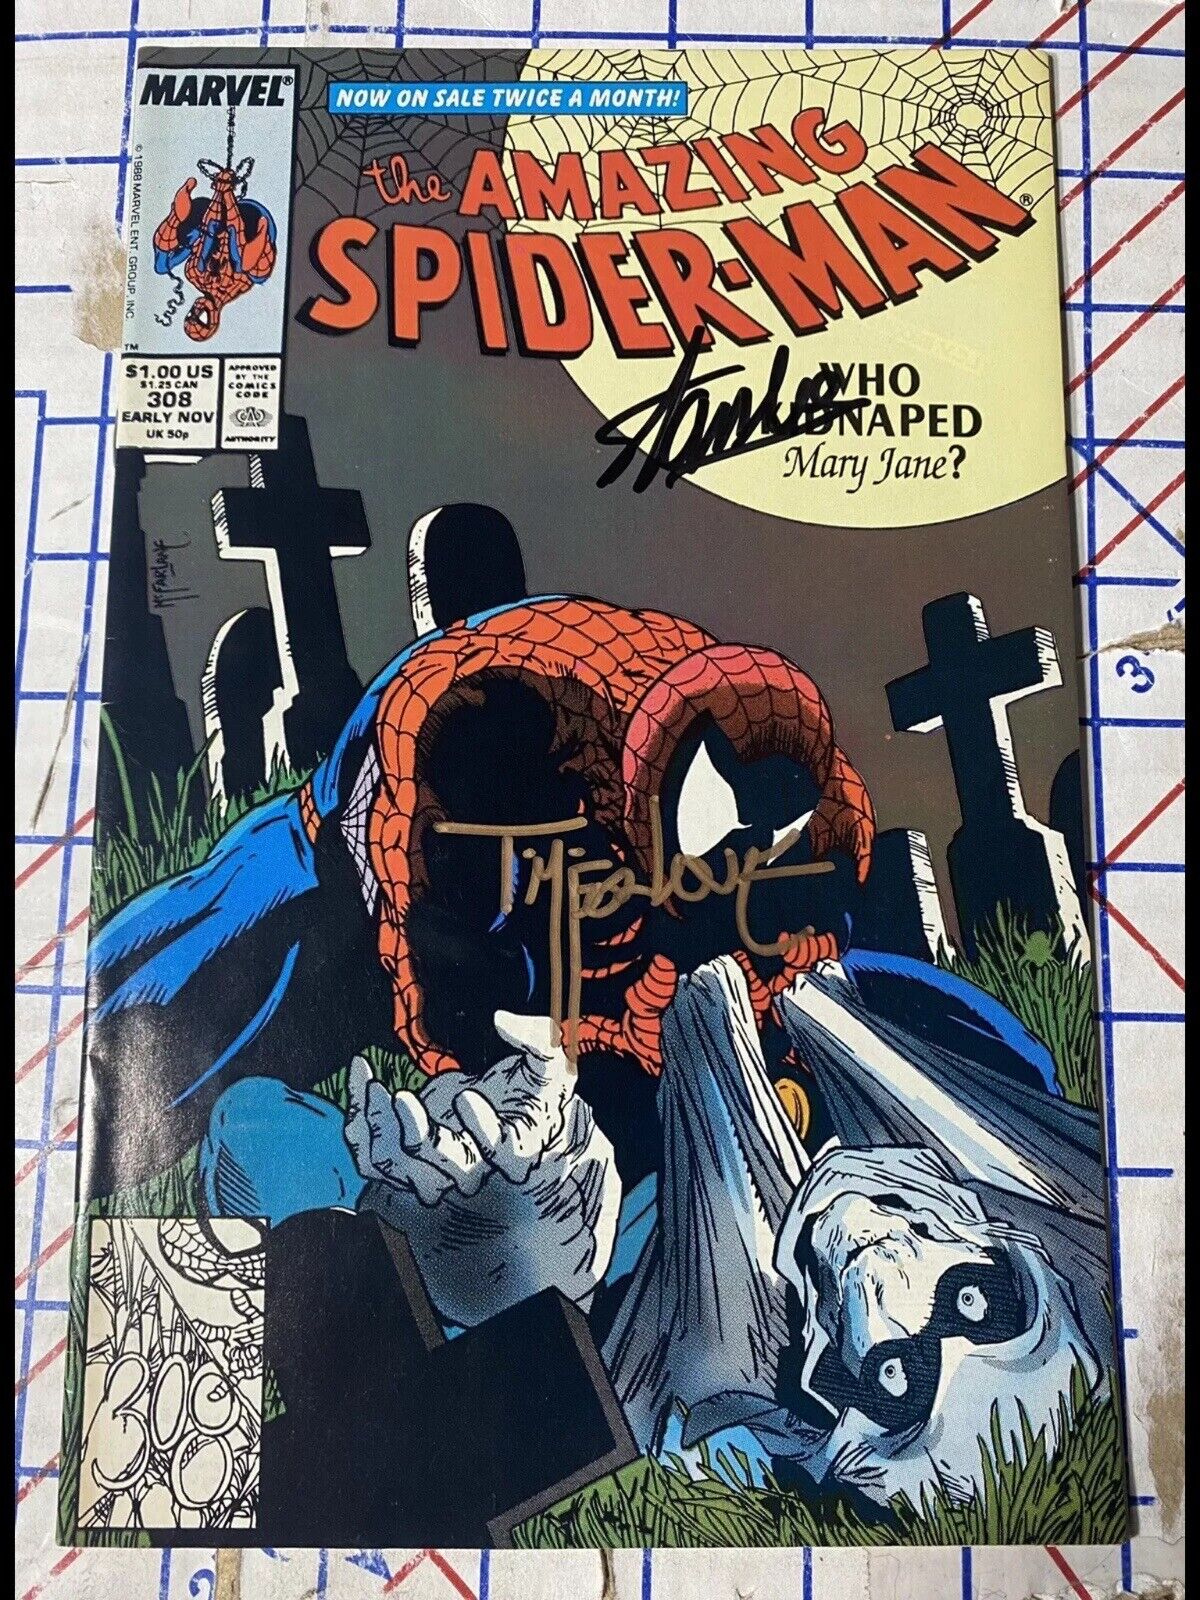 Amazing Spider-Man #308 Signed By Stan Lee & Todd McFarlane Action Comics